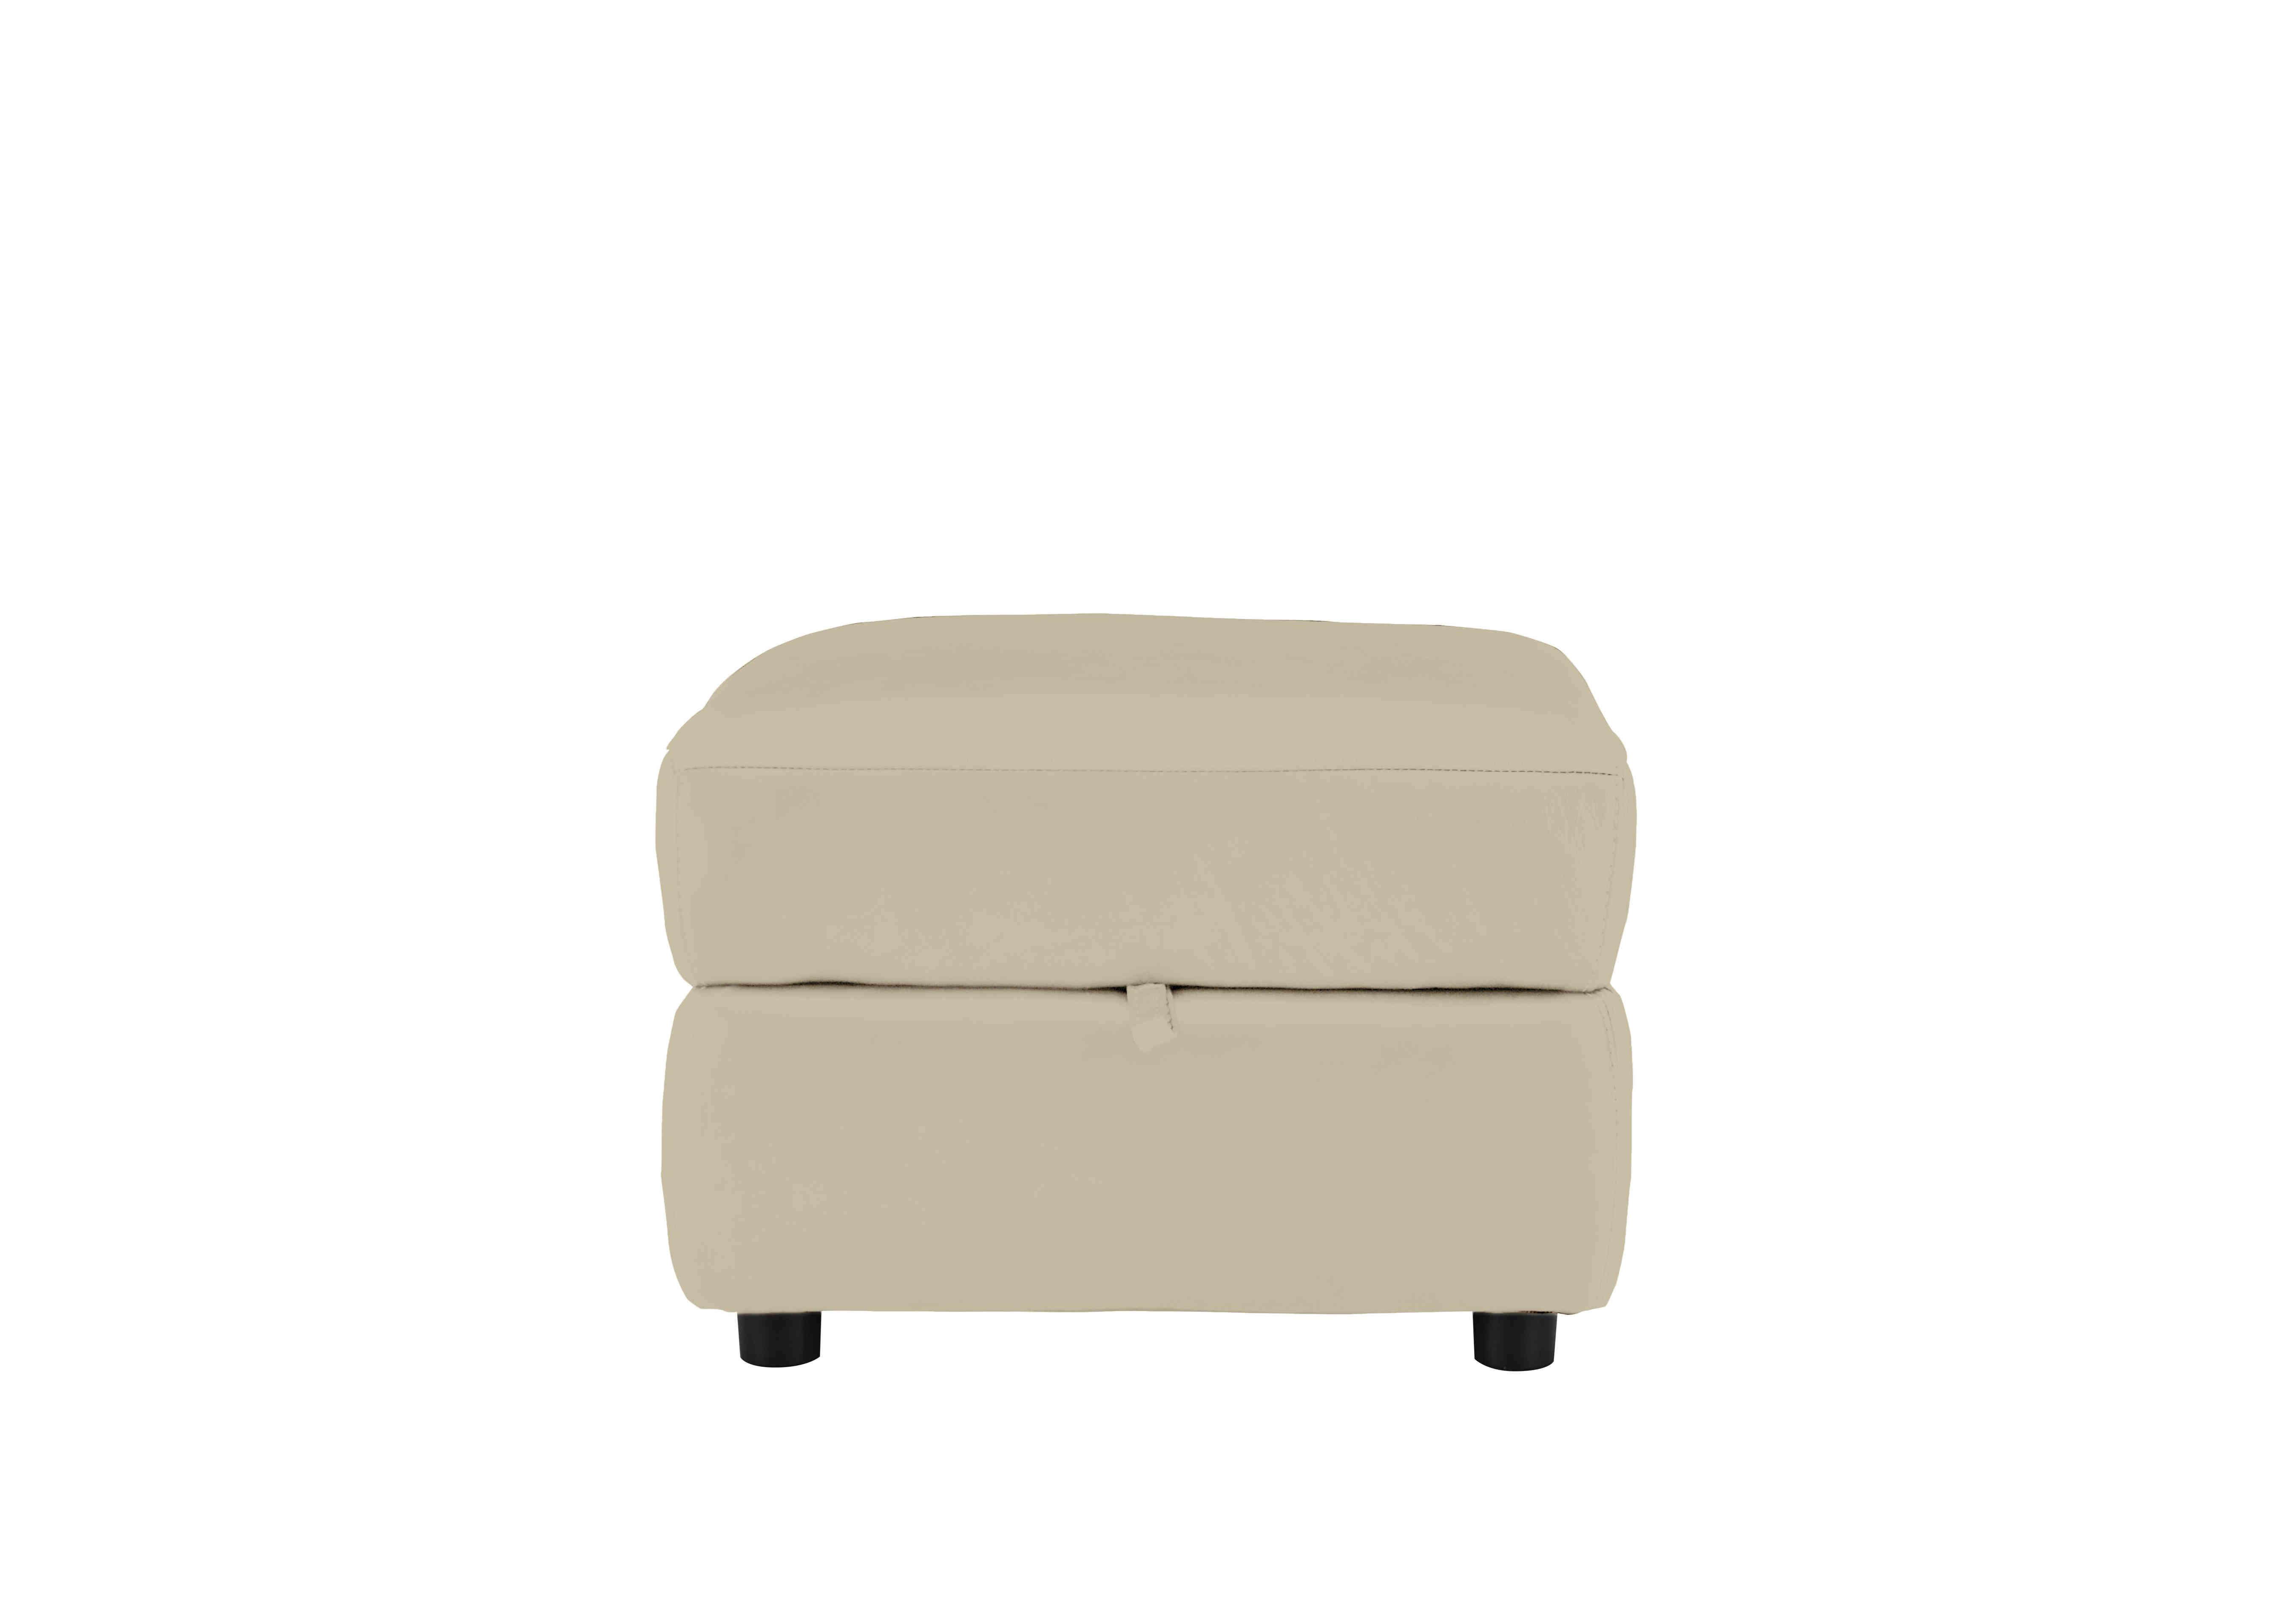 Relax Station Revive Leather Storage Footstool in Bv-862c Bisque on Furniture Village